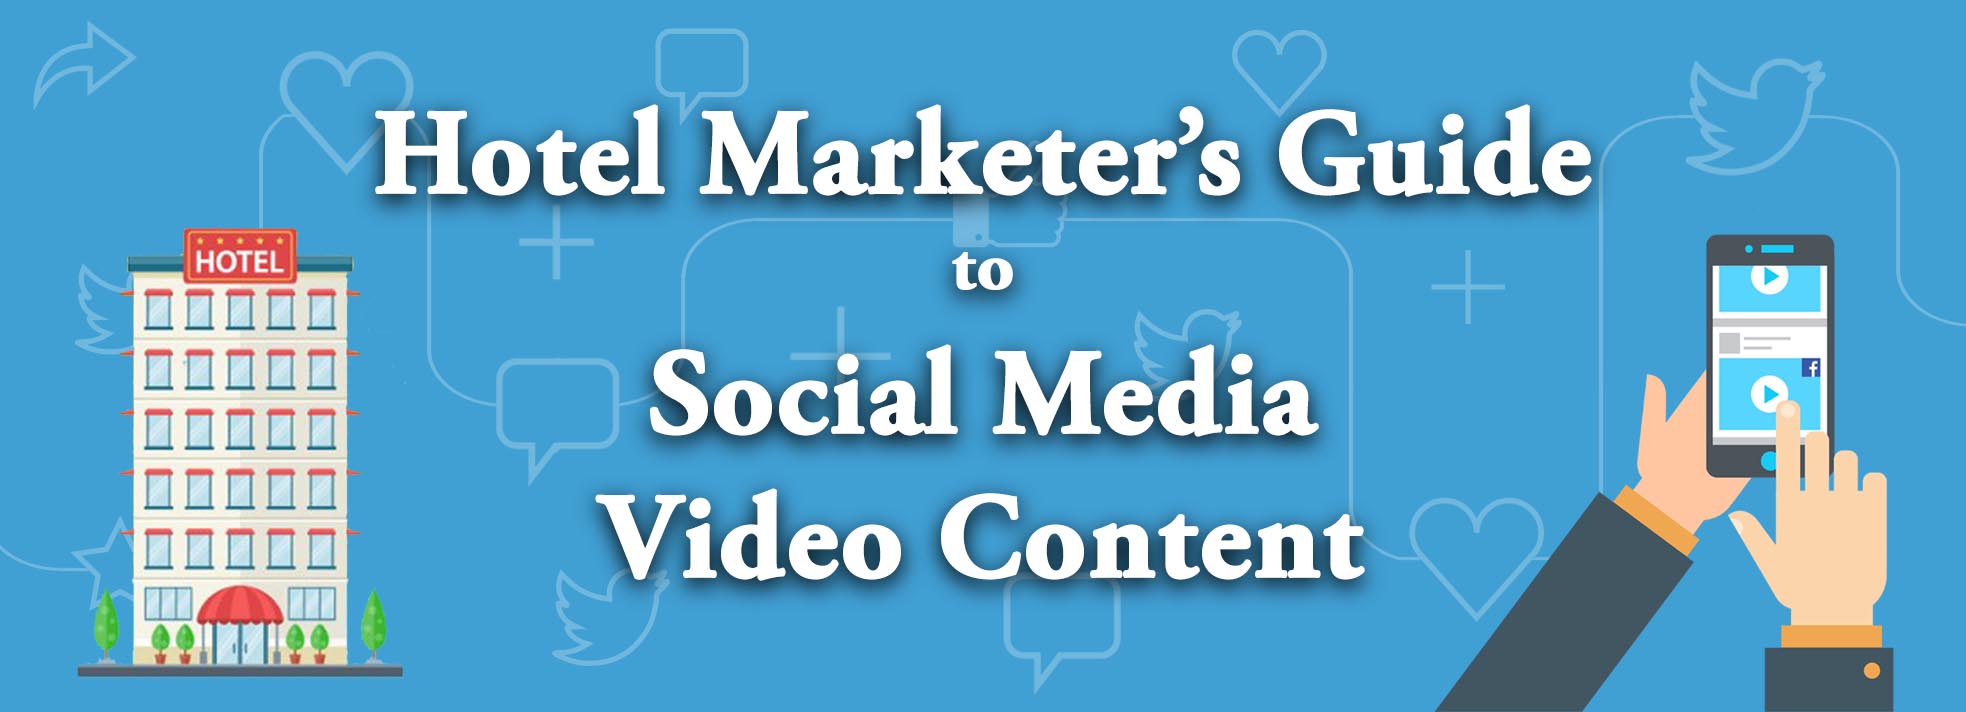 Hotel Marketer's Guide to Social Media Video Content